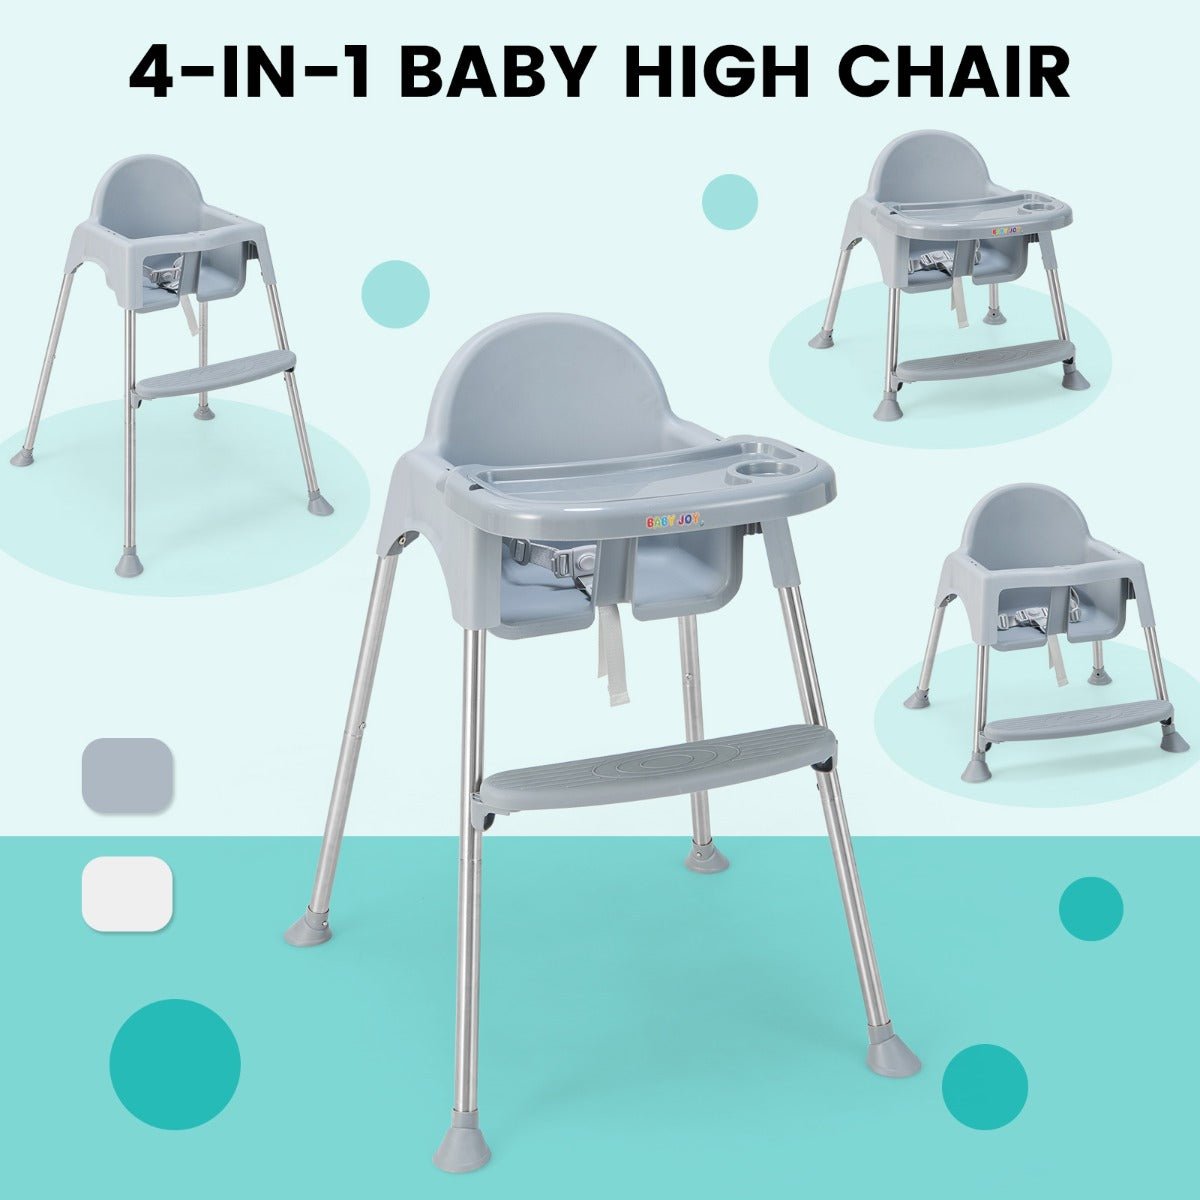 Safe and Practical: Grey 4-in-1 Baby High Chair with Double Tray